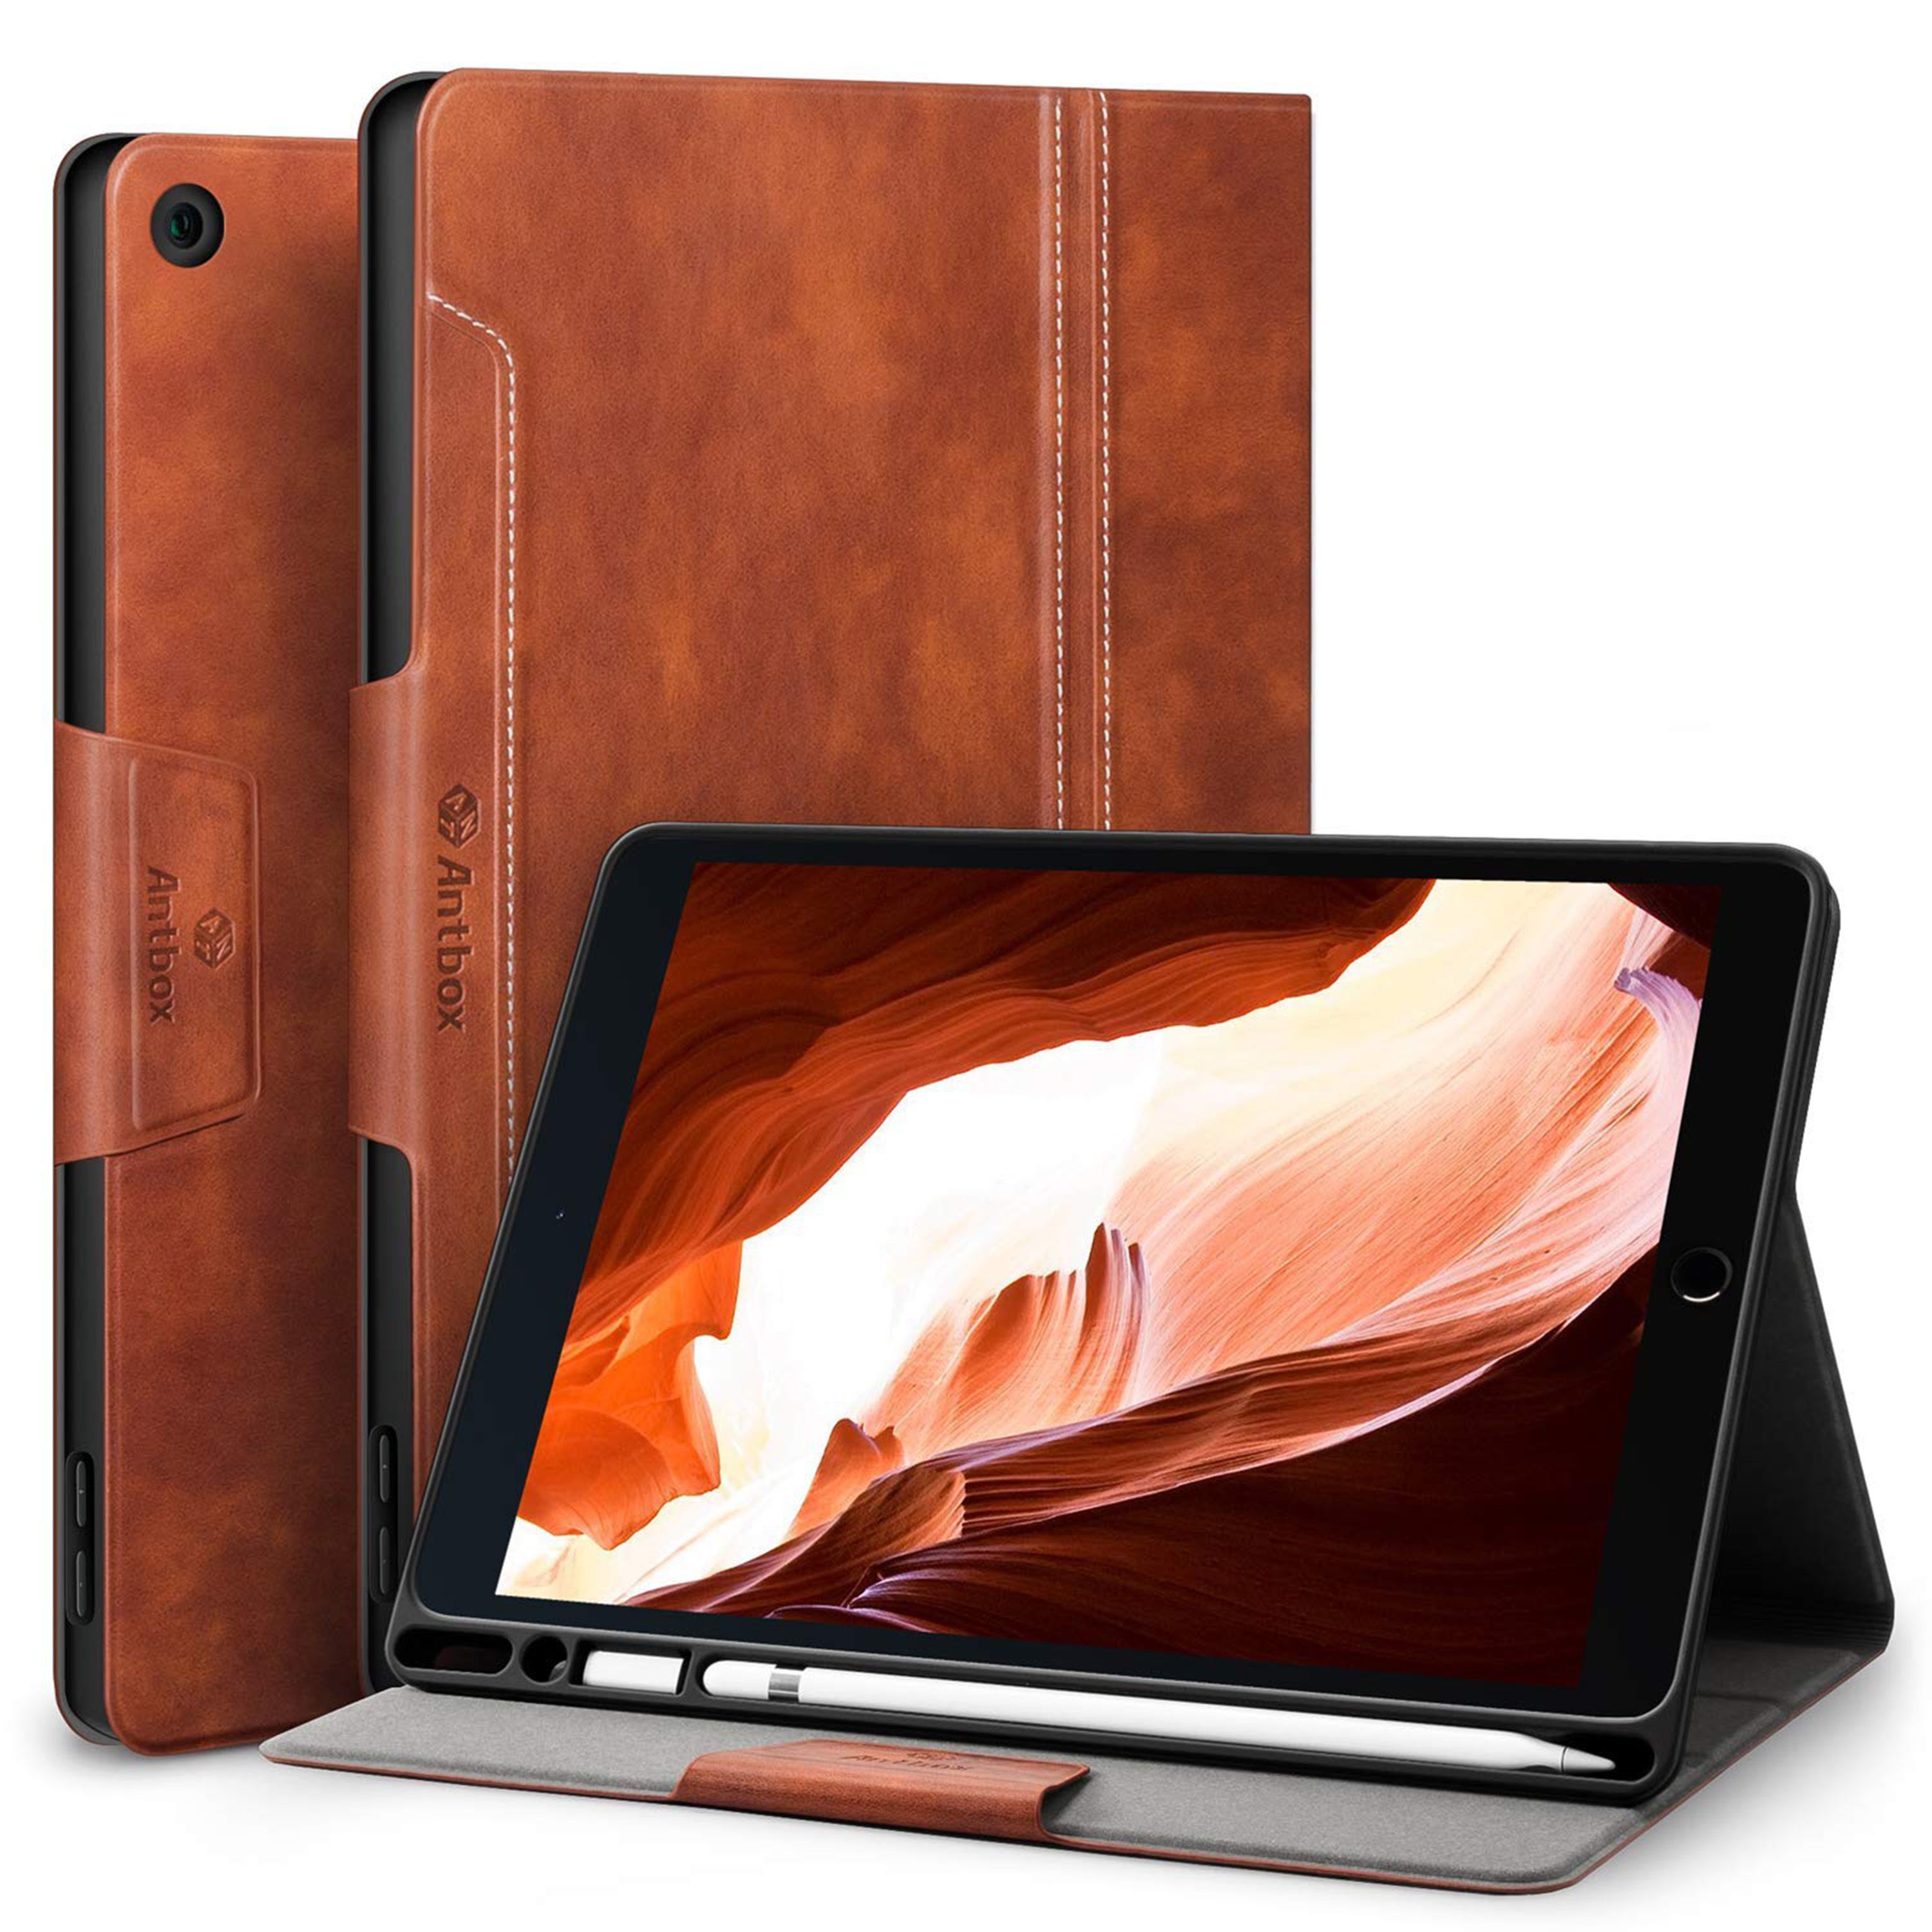 Making the case for the selection of an iPad case | The Seattle Times